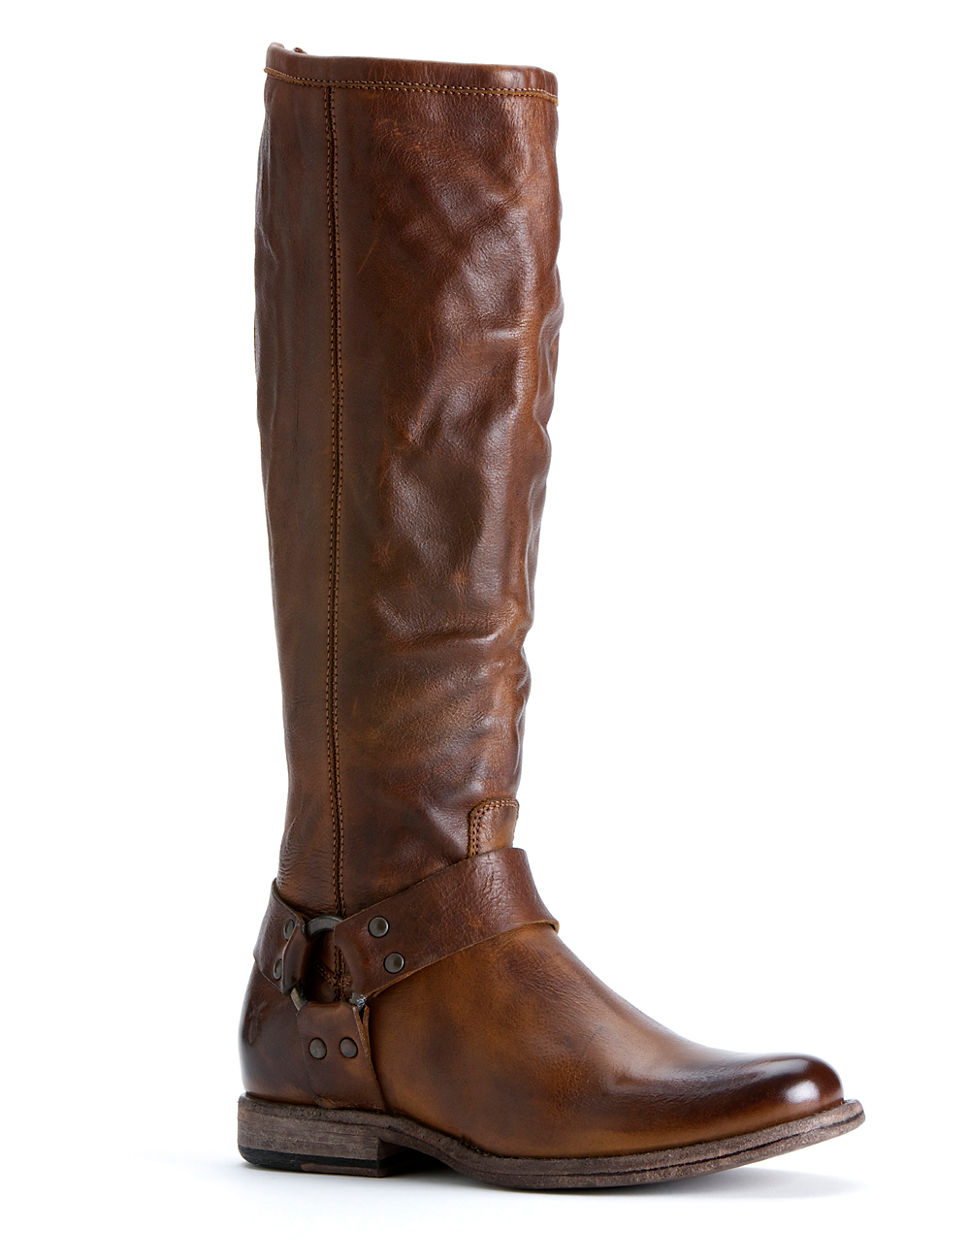 Frye Phillip Harness Wide Calf Riding Boots in Brown | Lyst